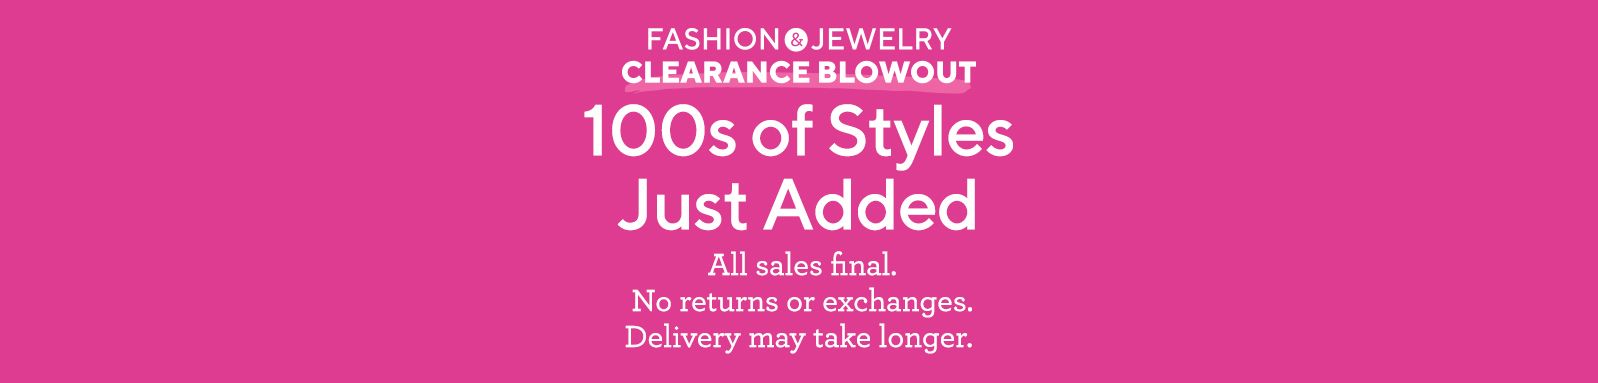 Fashion & Jewelry Clearance Blowout. 100s of Styles Just Added. All sales final. No returns or exchanges. Delivery may take longer.